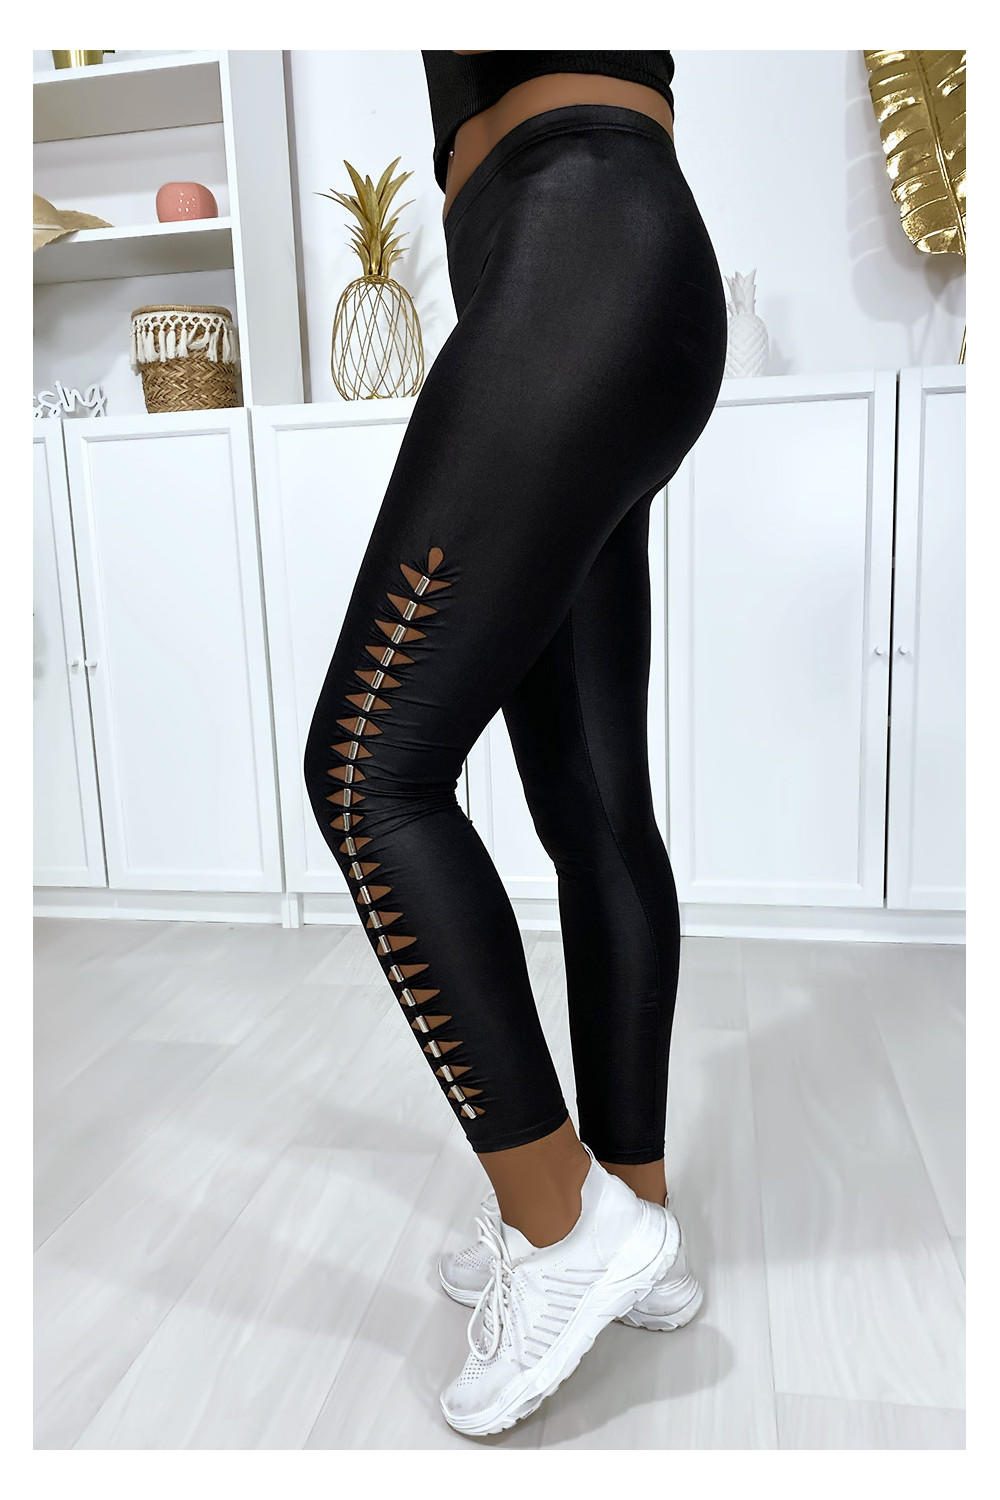 Very stretchy shiny black leggings with accessory on the sides